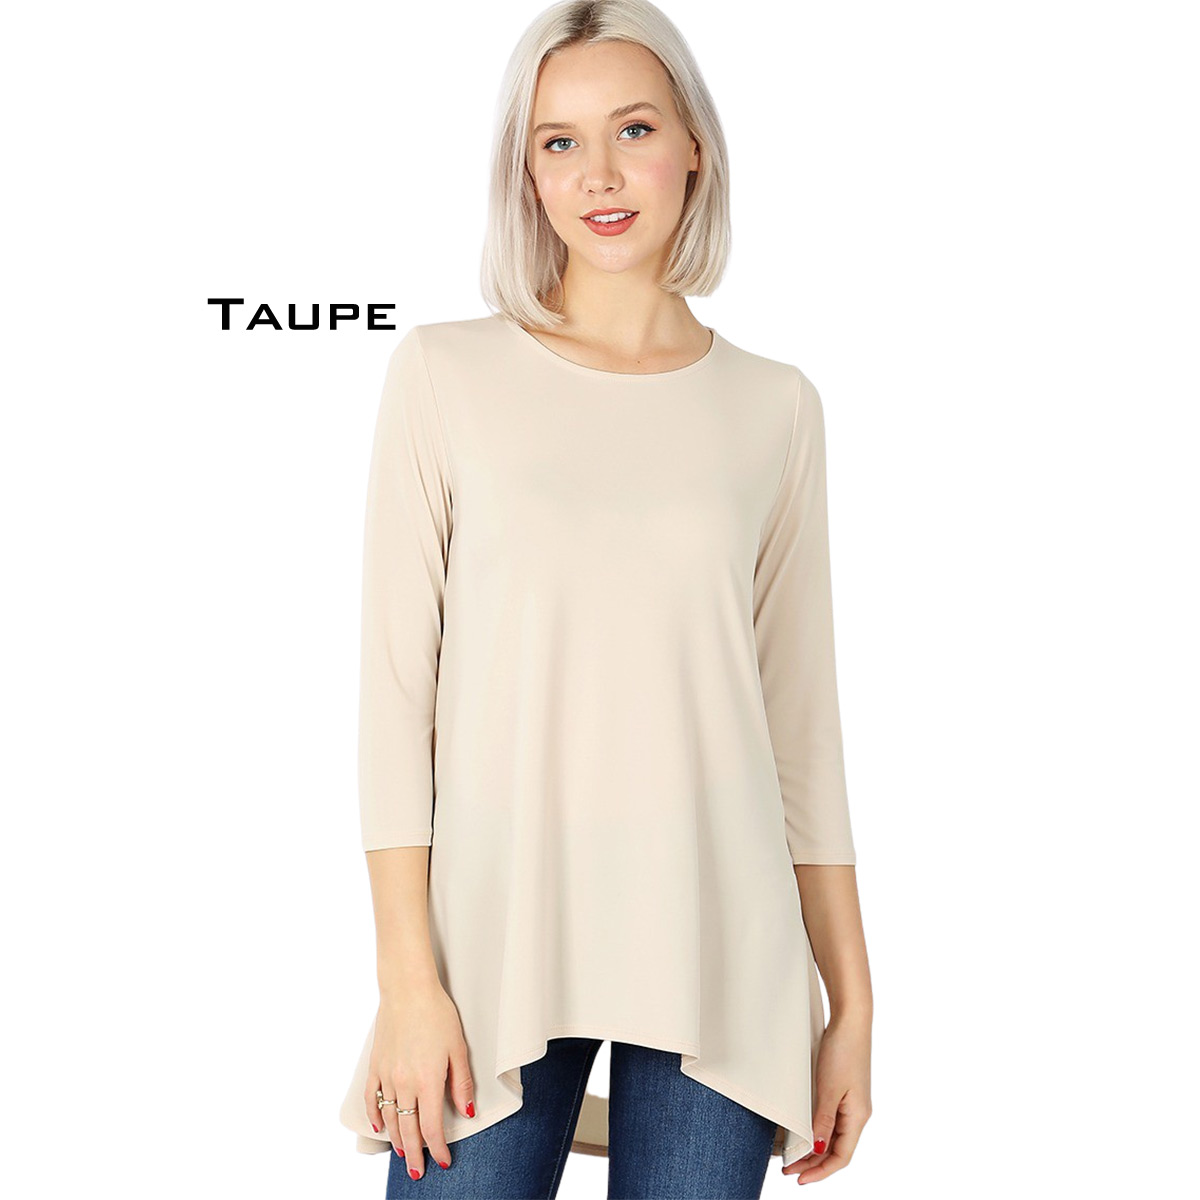 2367 - Ity High-Low 3/4 Sleeve Top ASH COPPER Ity High-Low 3/4 Sleeve Top 2367 - X-Large